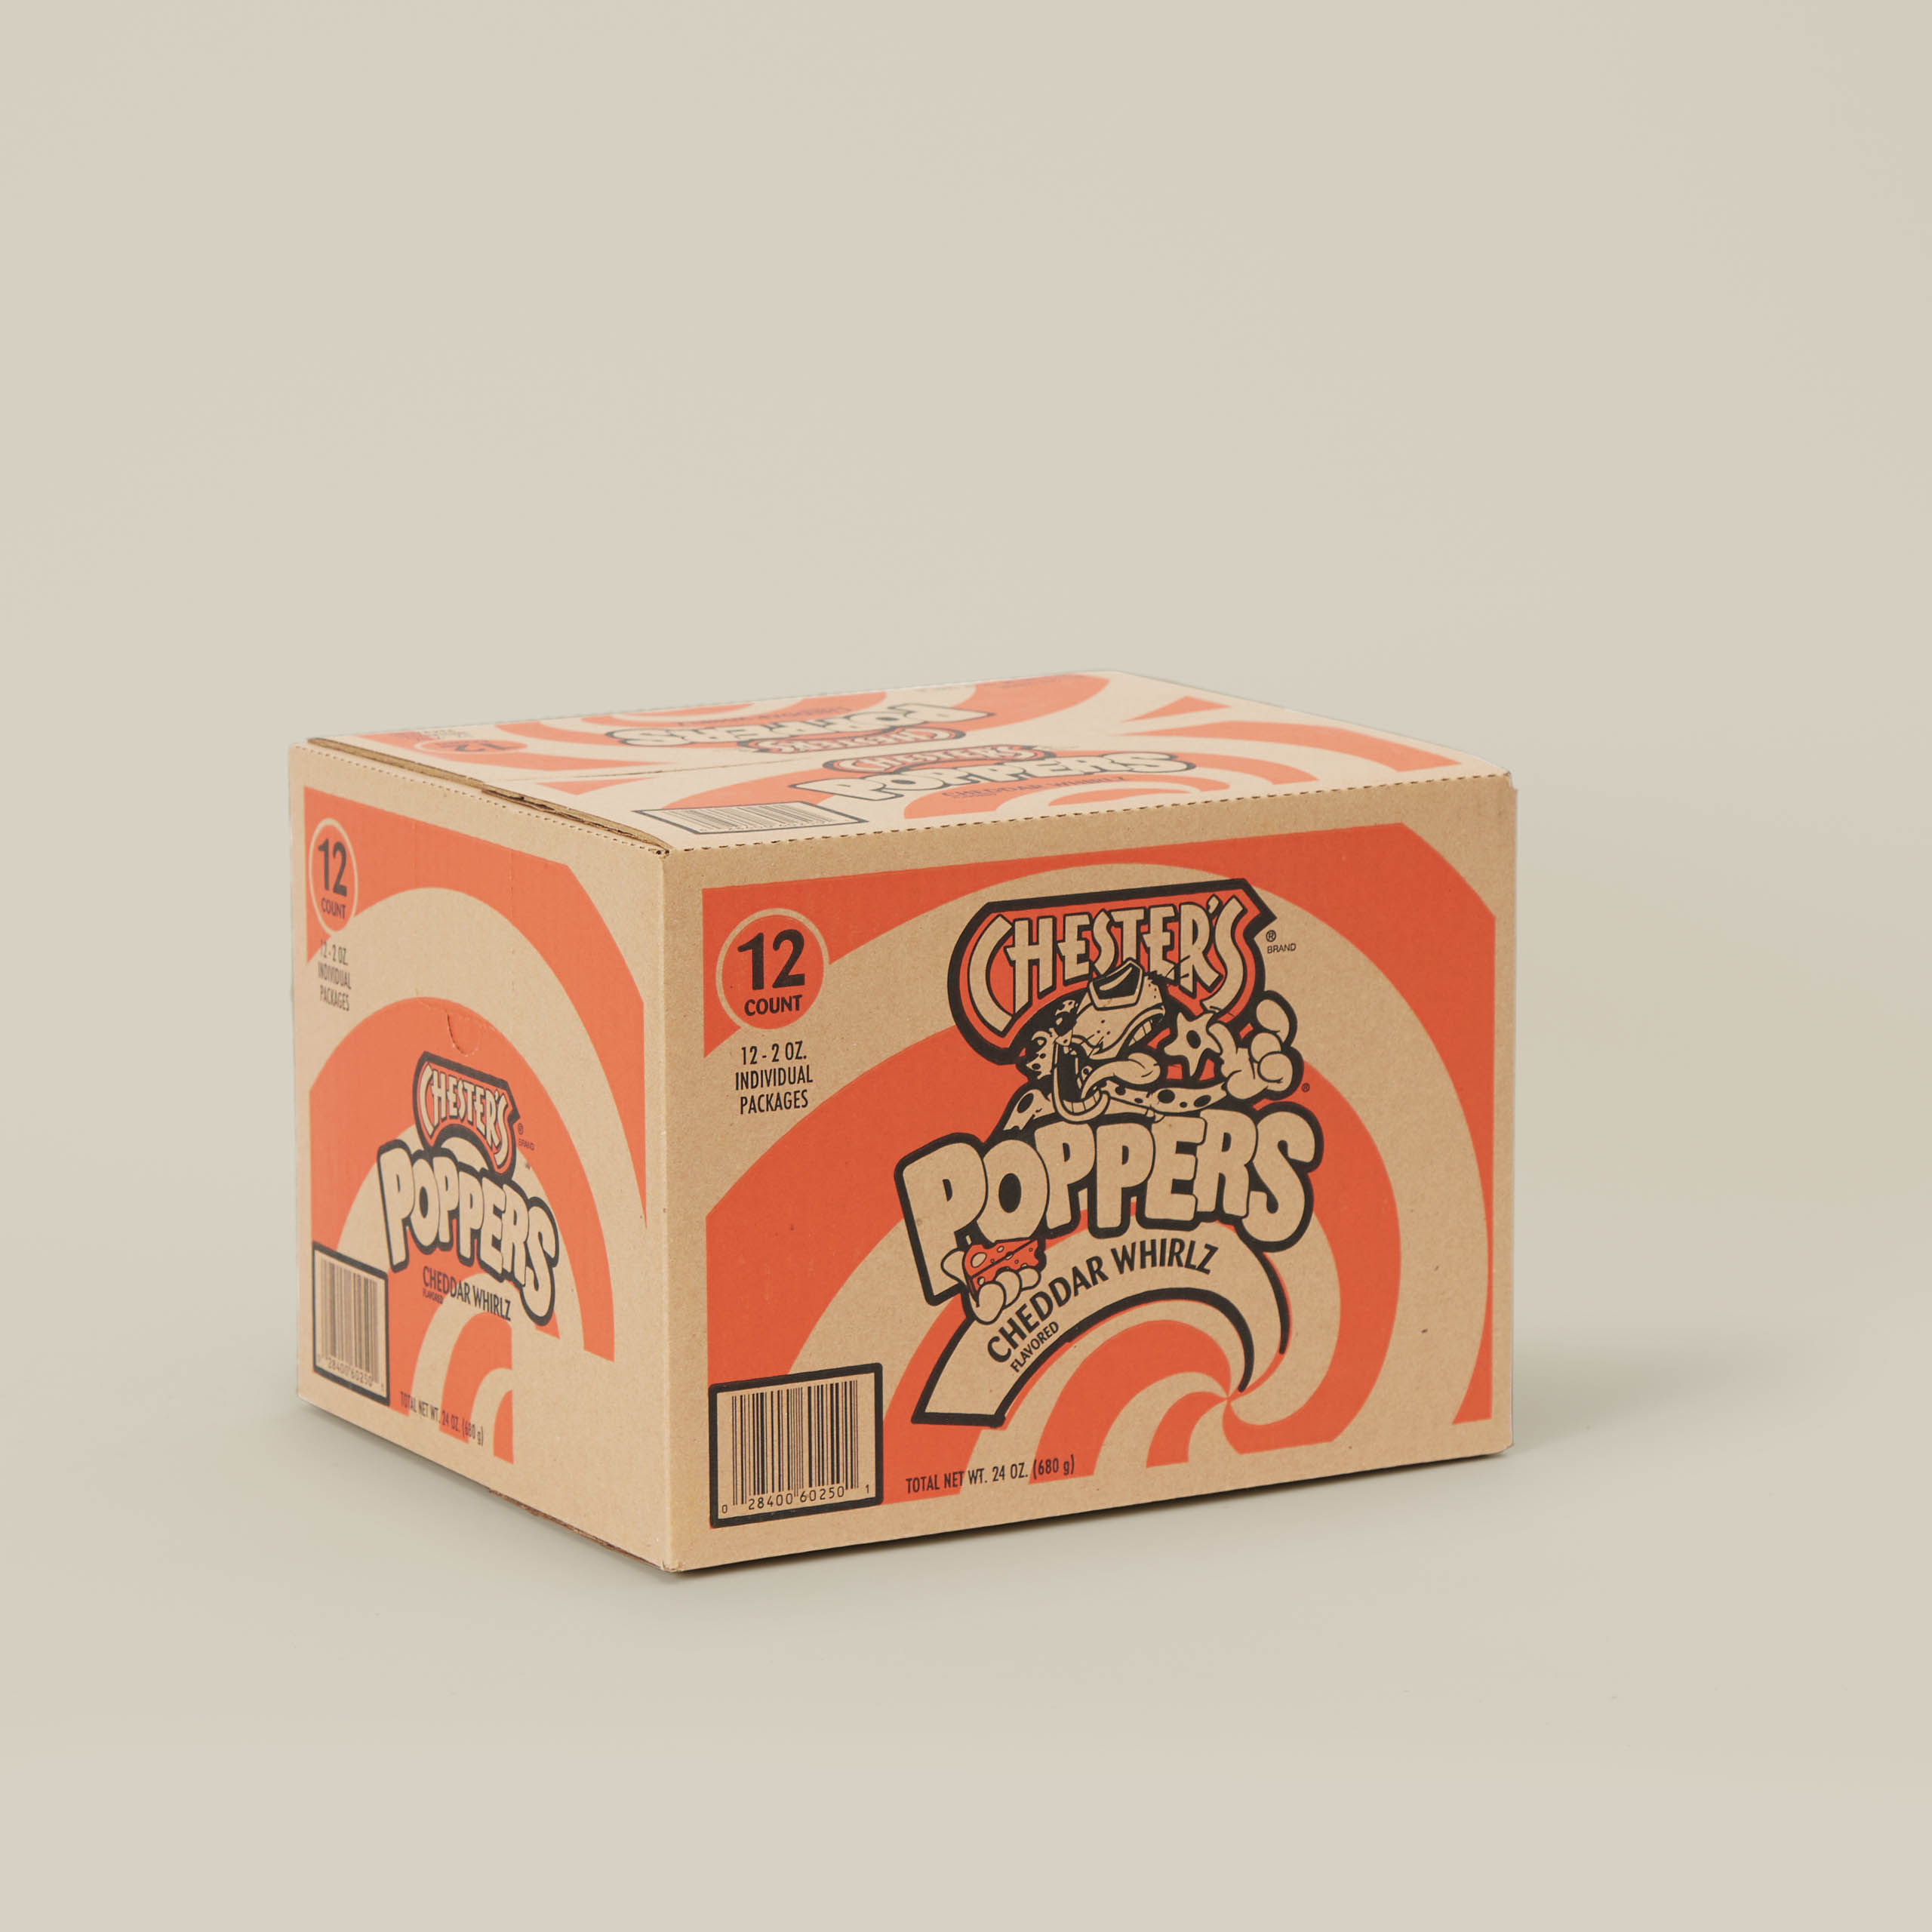 A box of cheetos poppers on a white background.